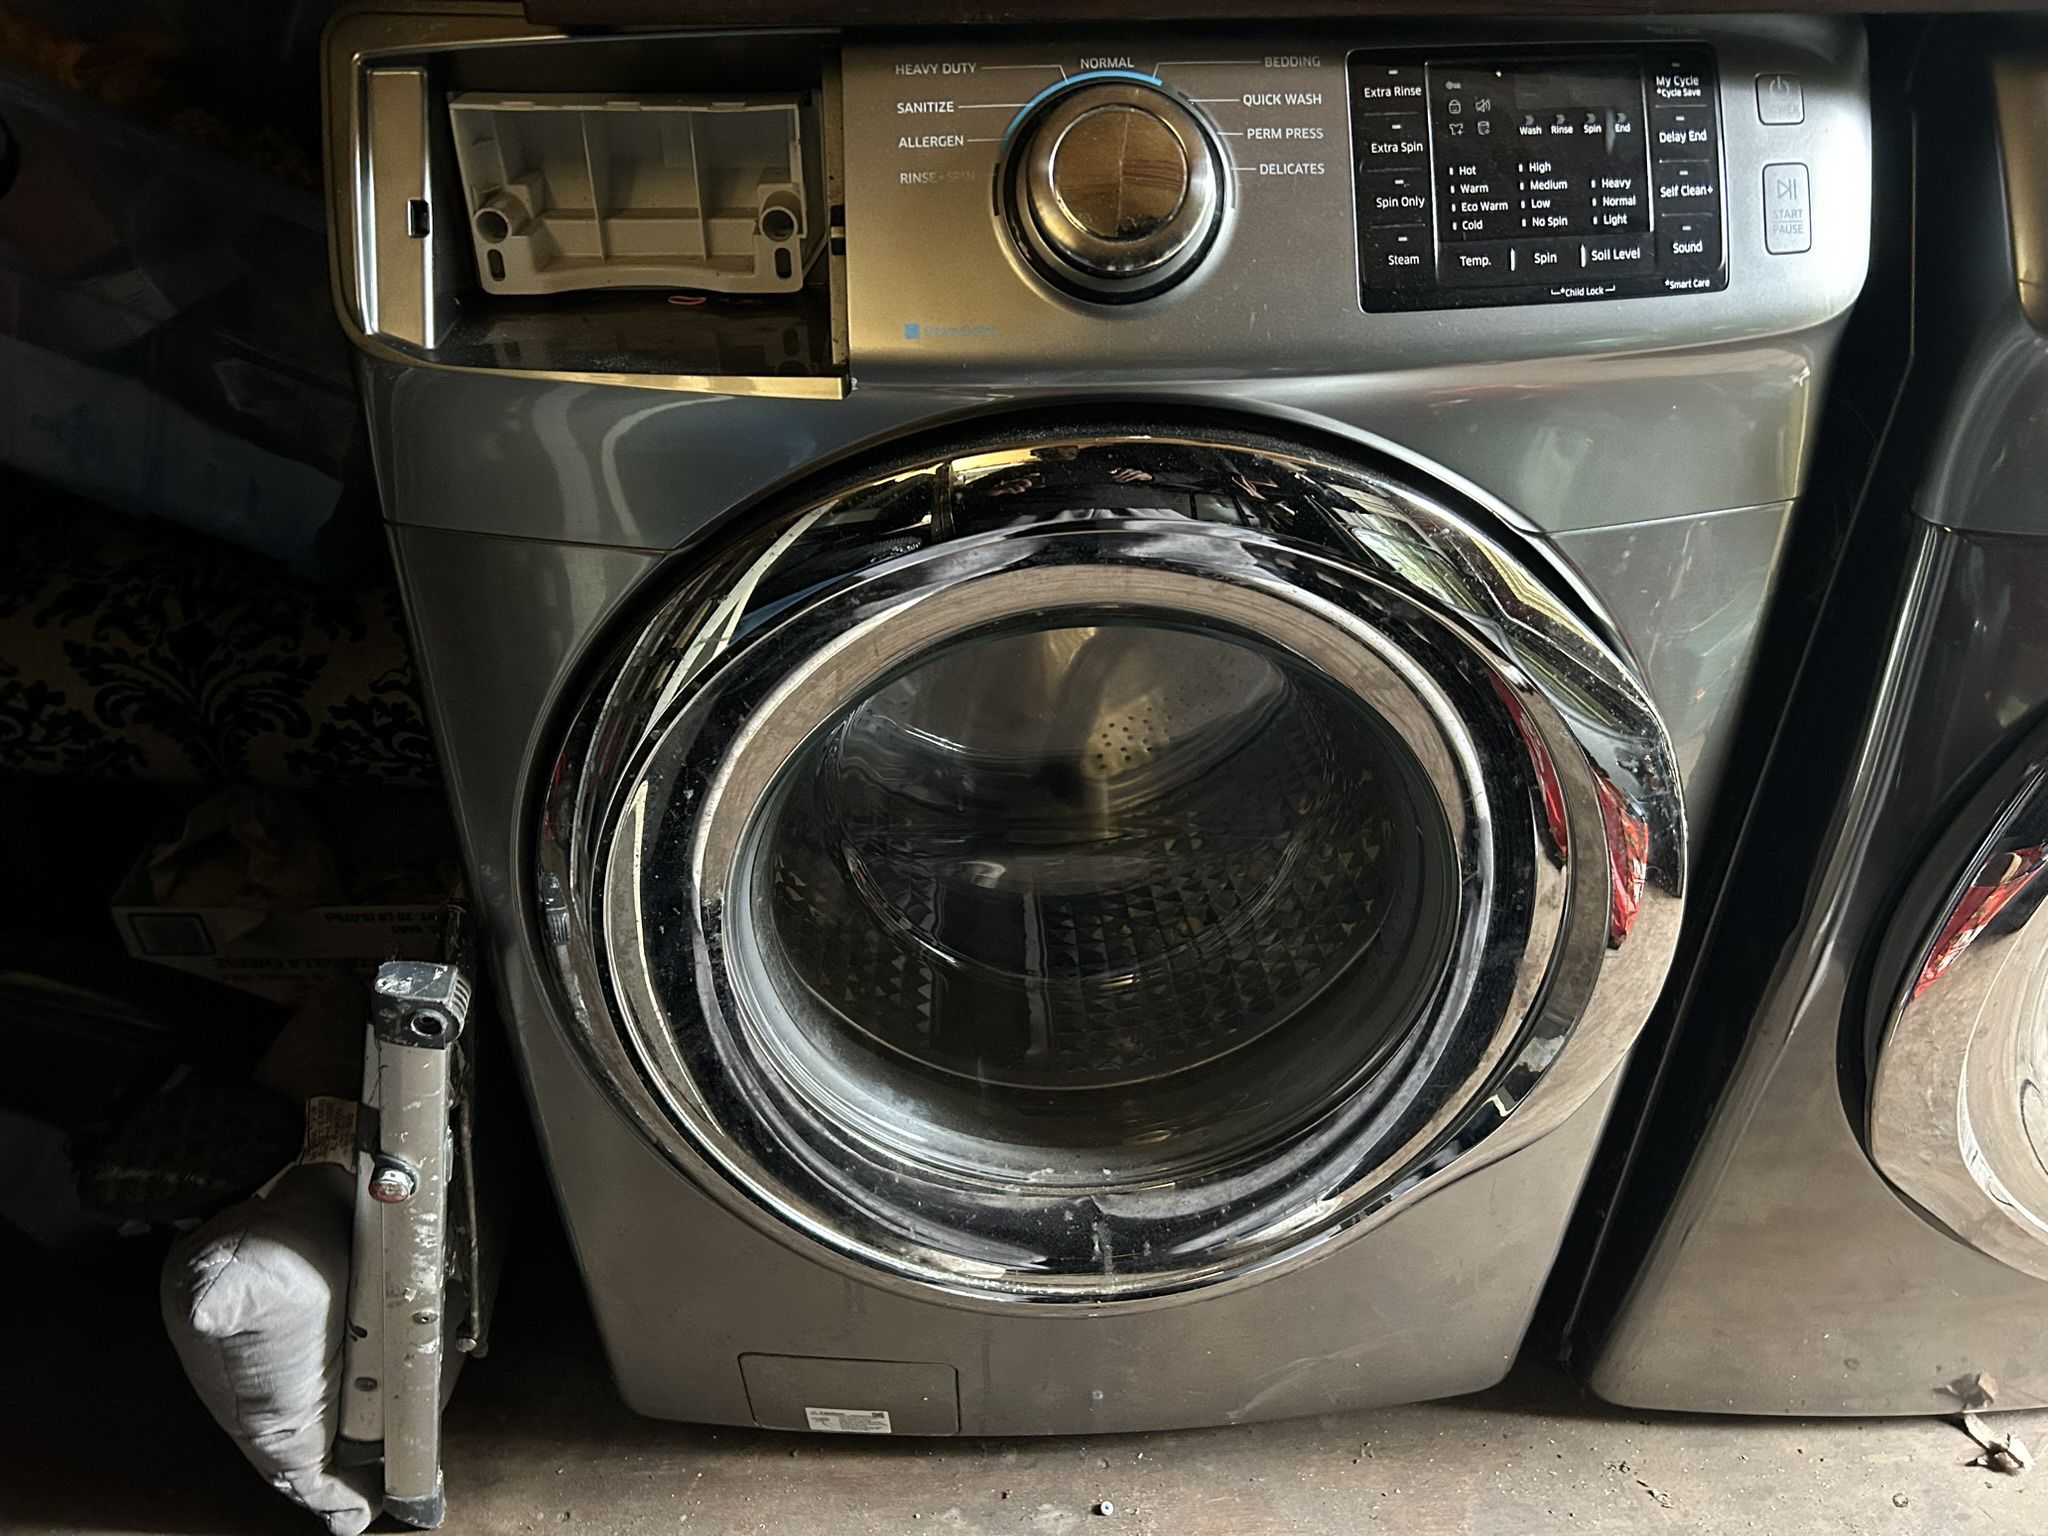 Samsung washer and dyer set